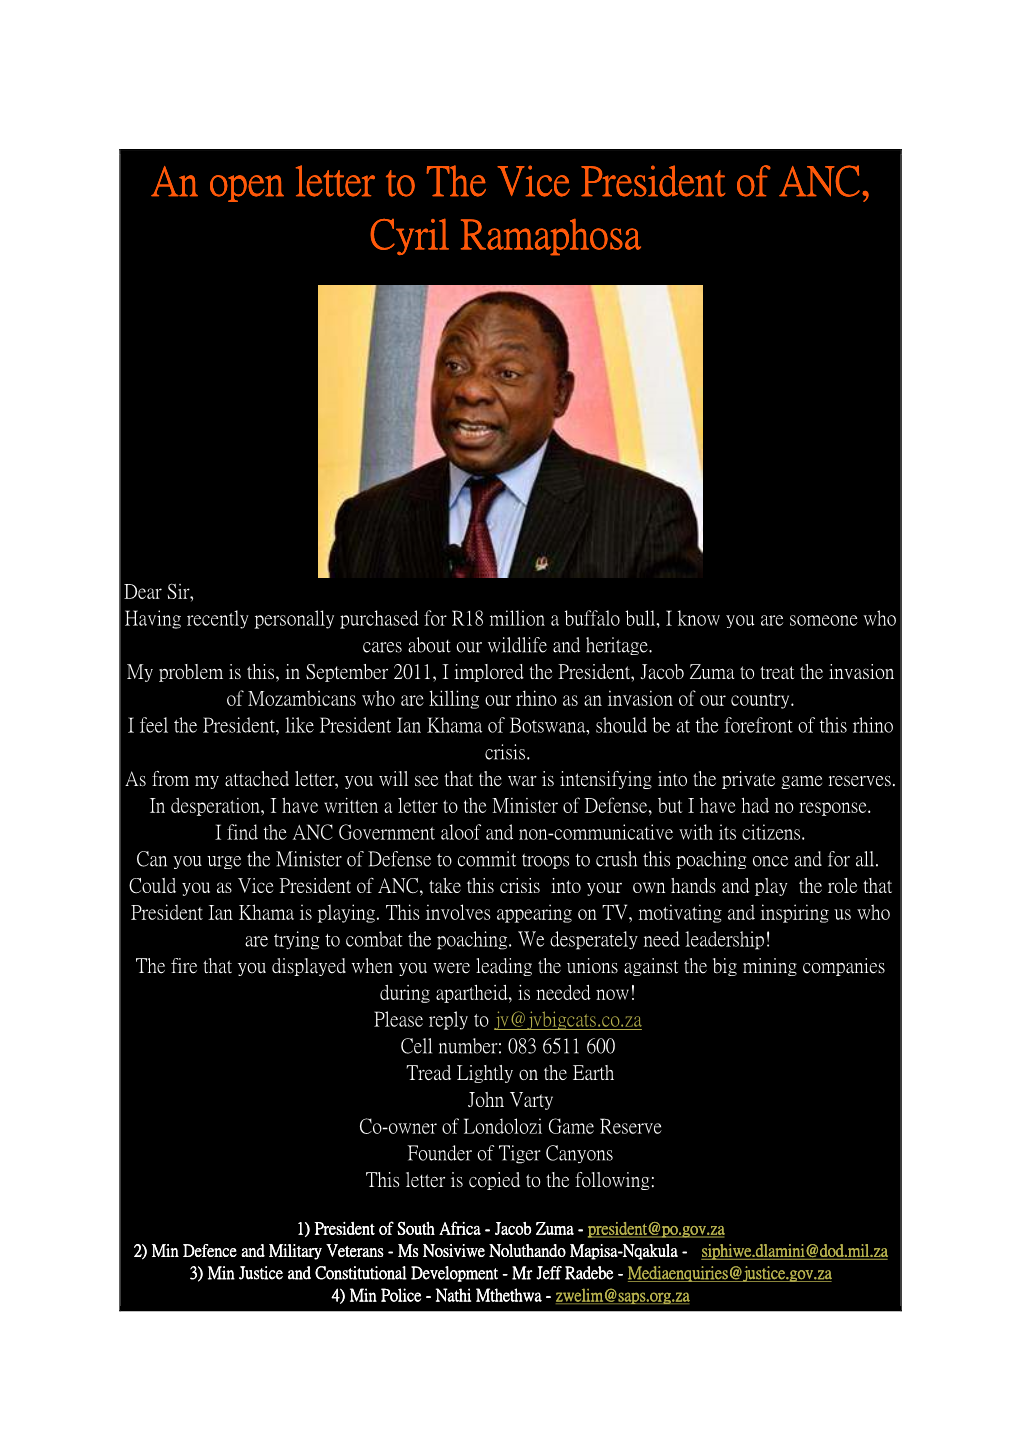 An Open Letter to the Vice President of ANC, an Open Letter to the Vice President of ANC, Cyril Ramaphosa Cyril Ramaphosa